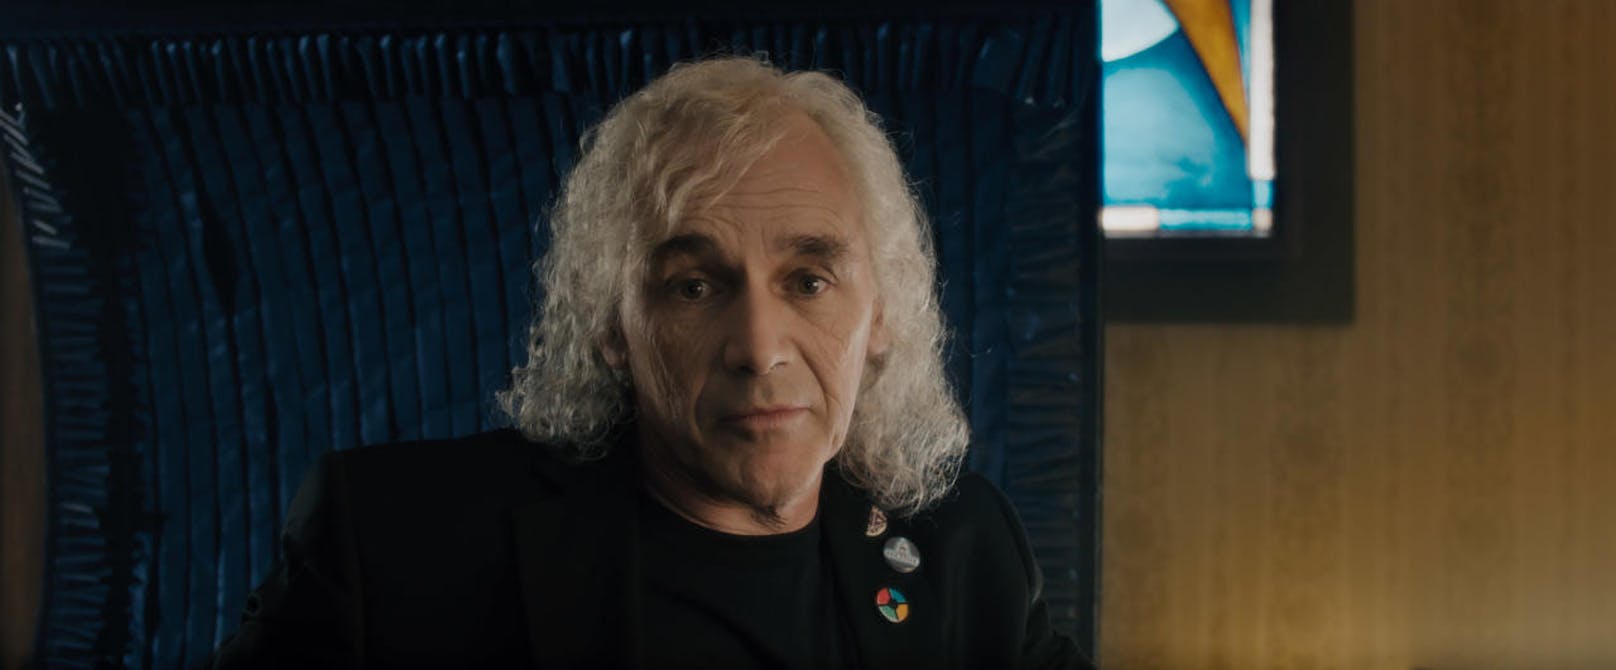 Mark Rylance in "Ready Player One". 